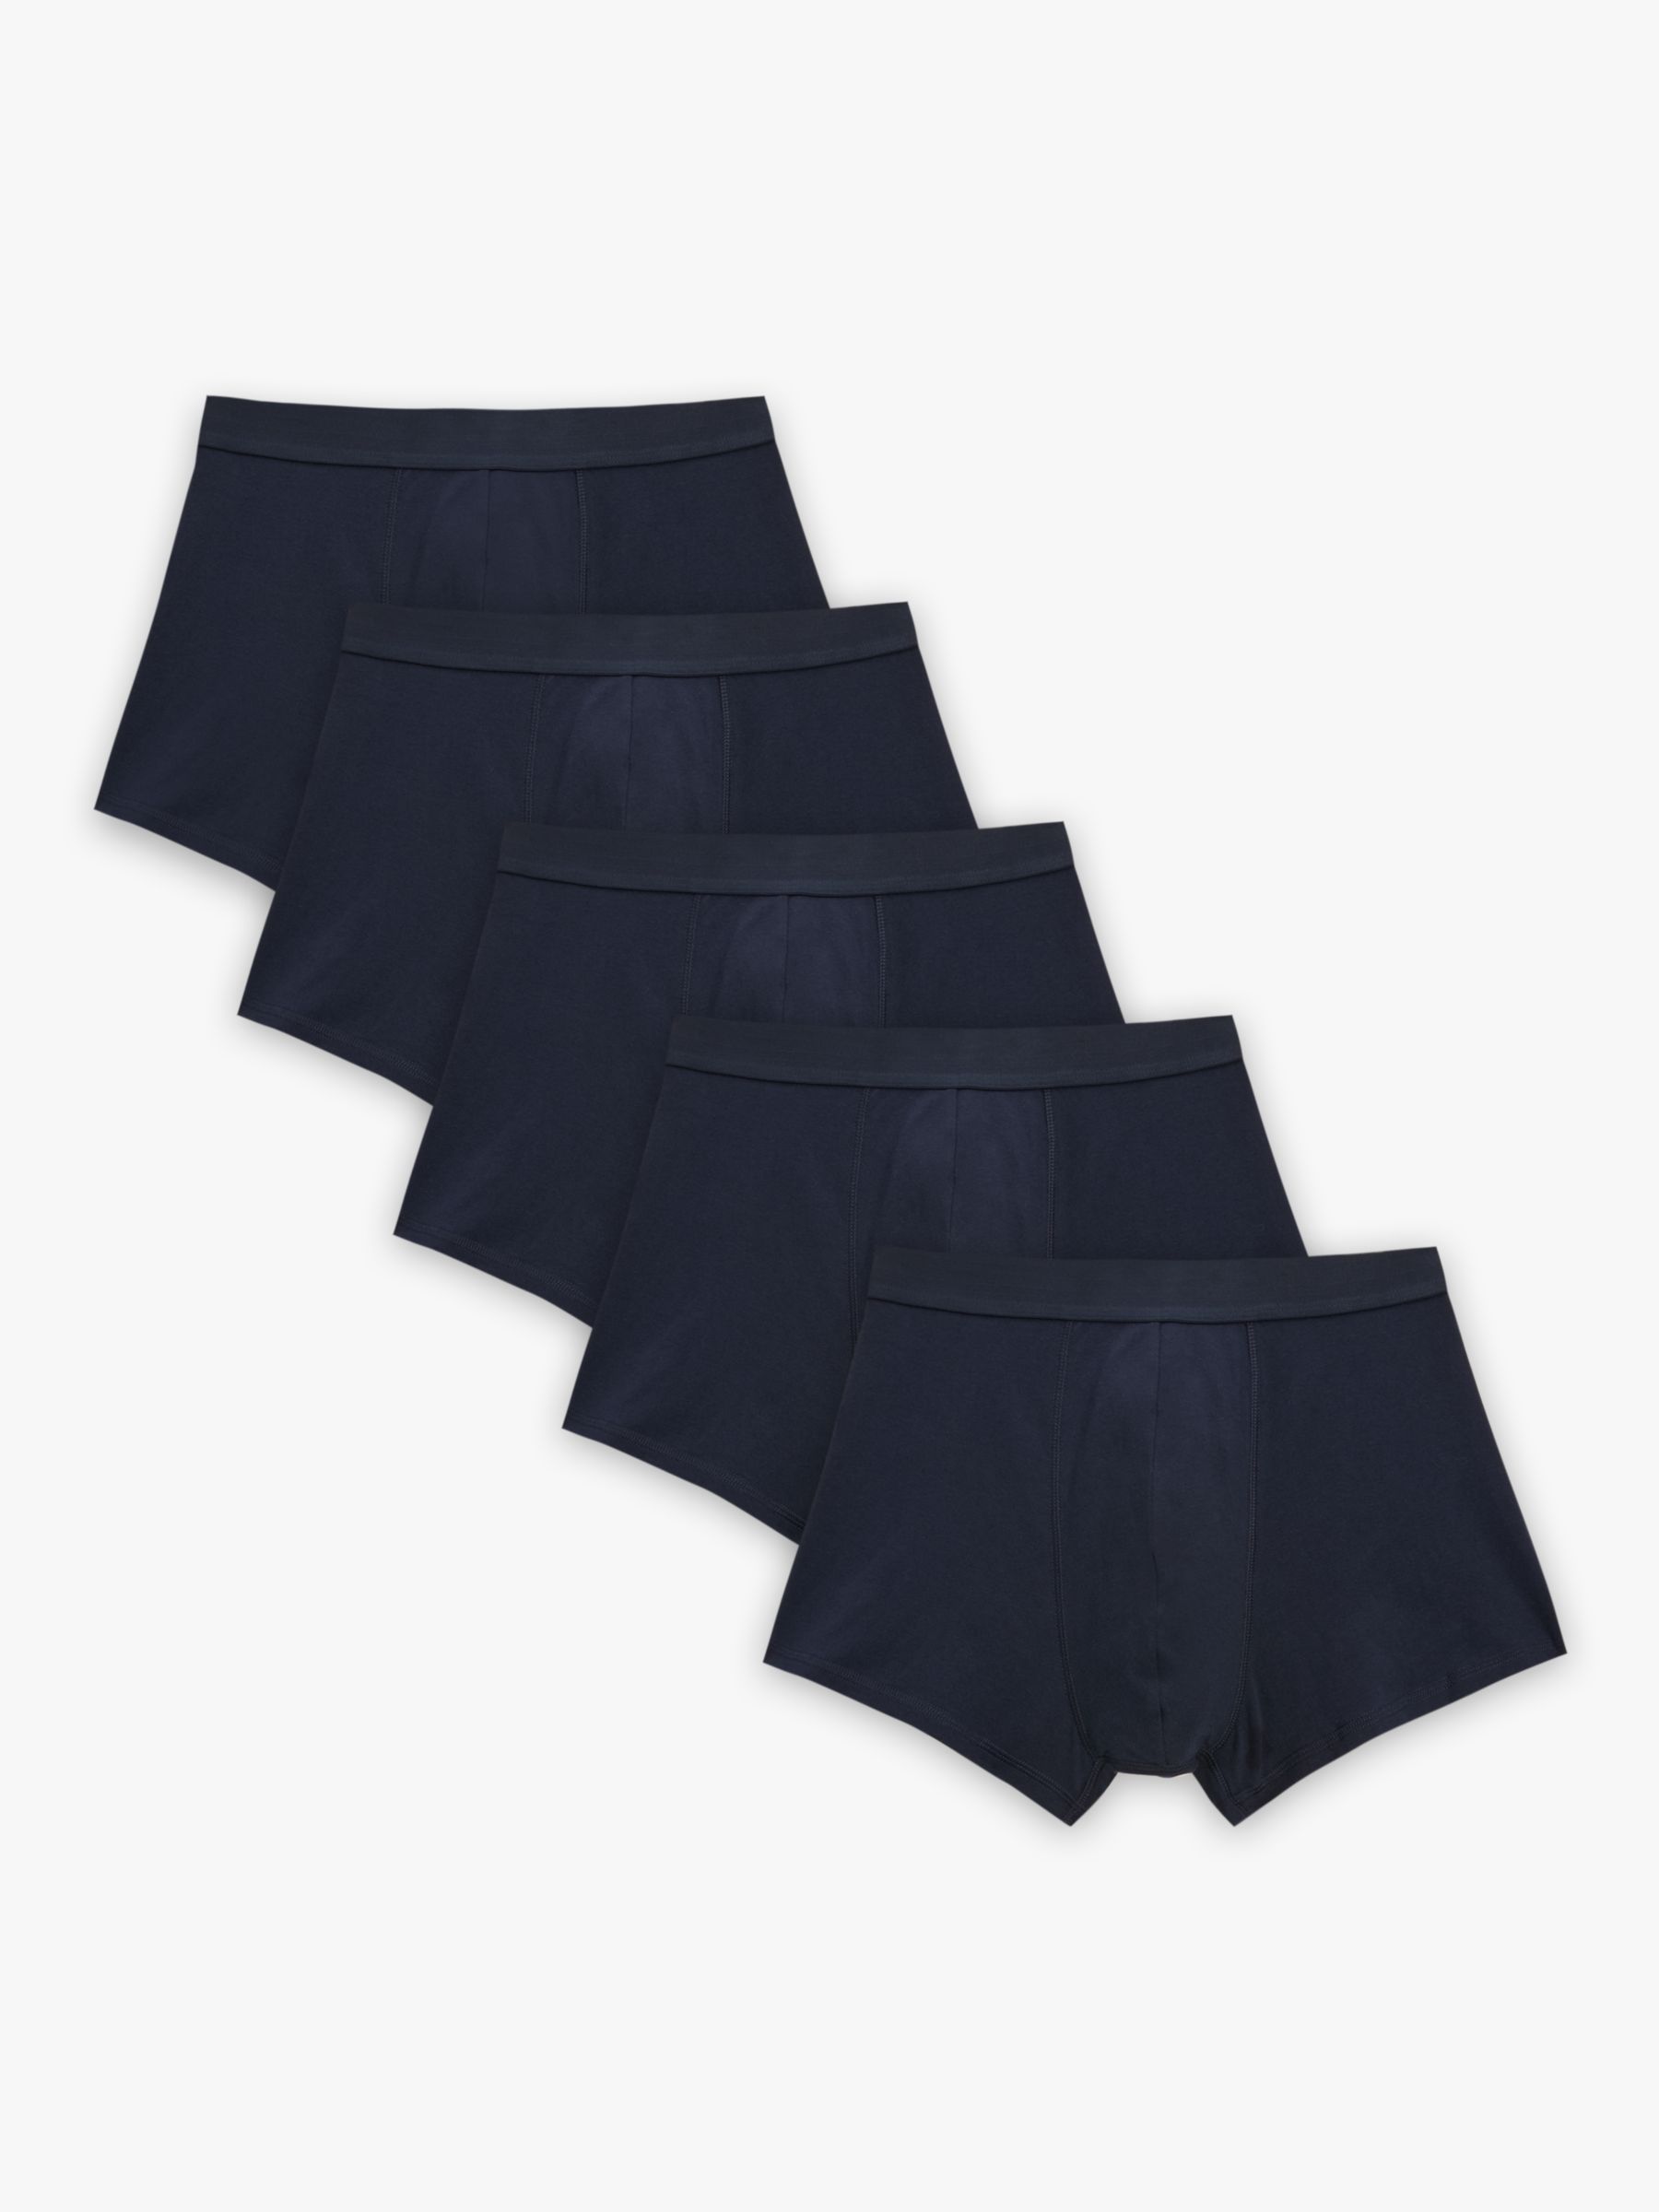 John Lewis ANYDAY Stretch Cotton Plain Trunks, Pack of 5, Navy, M